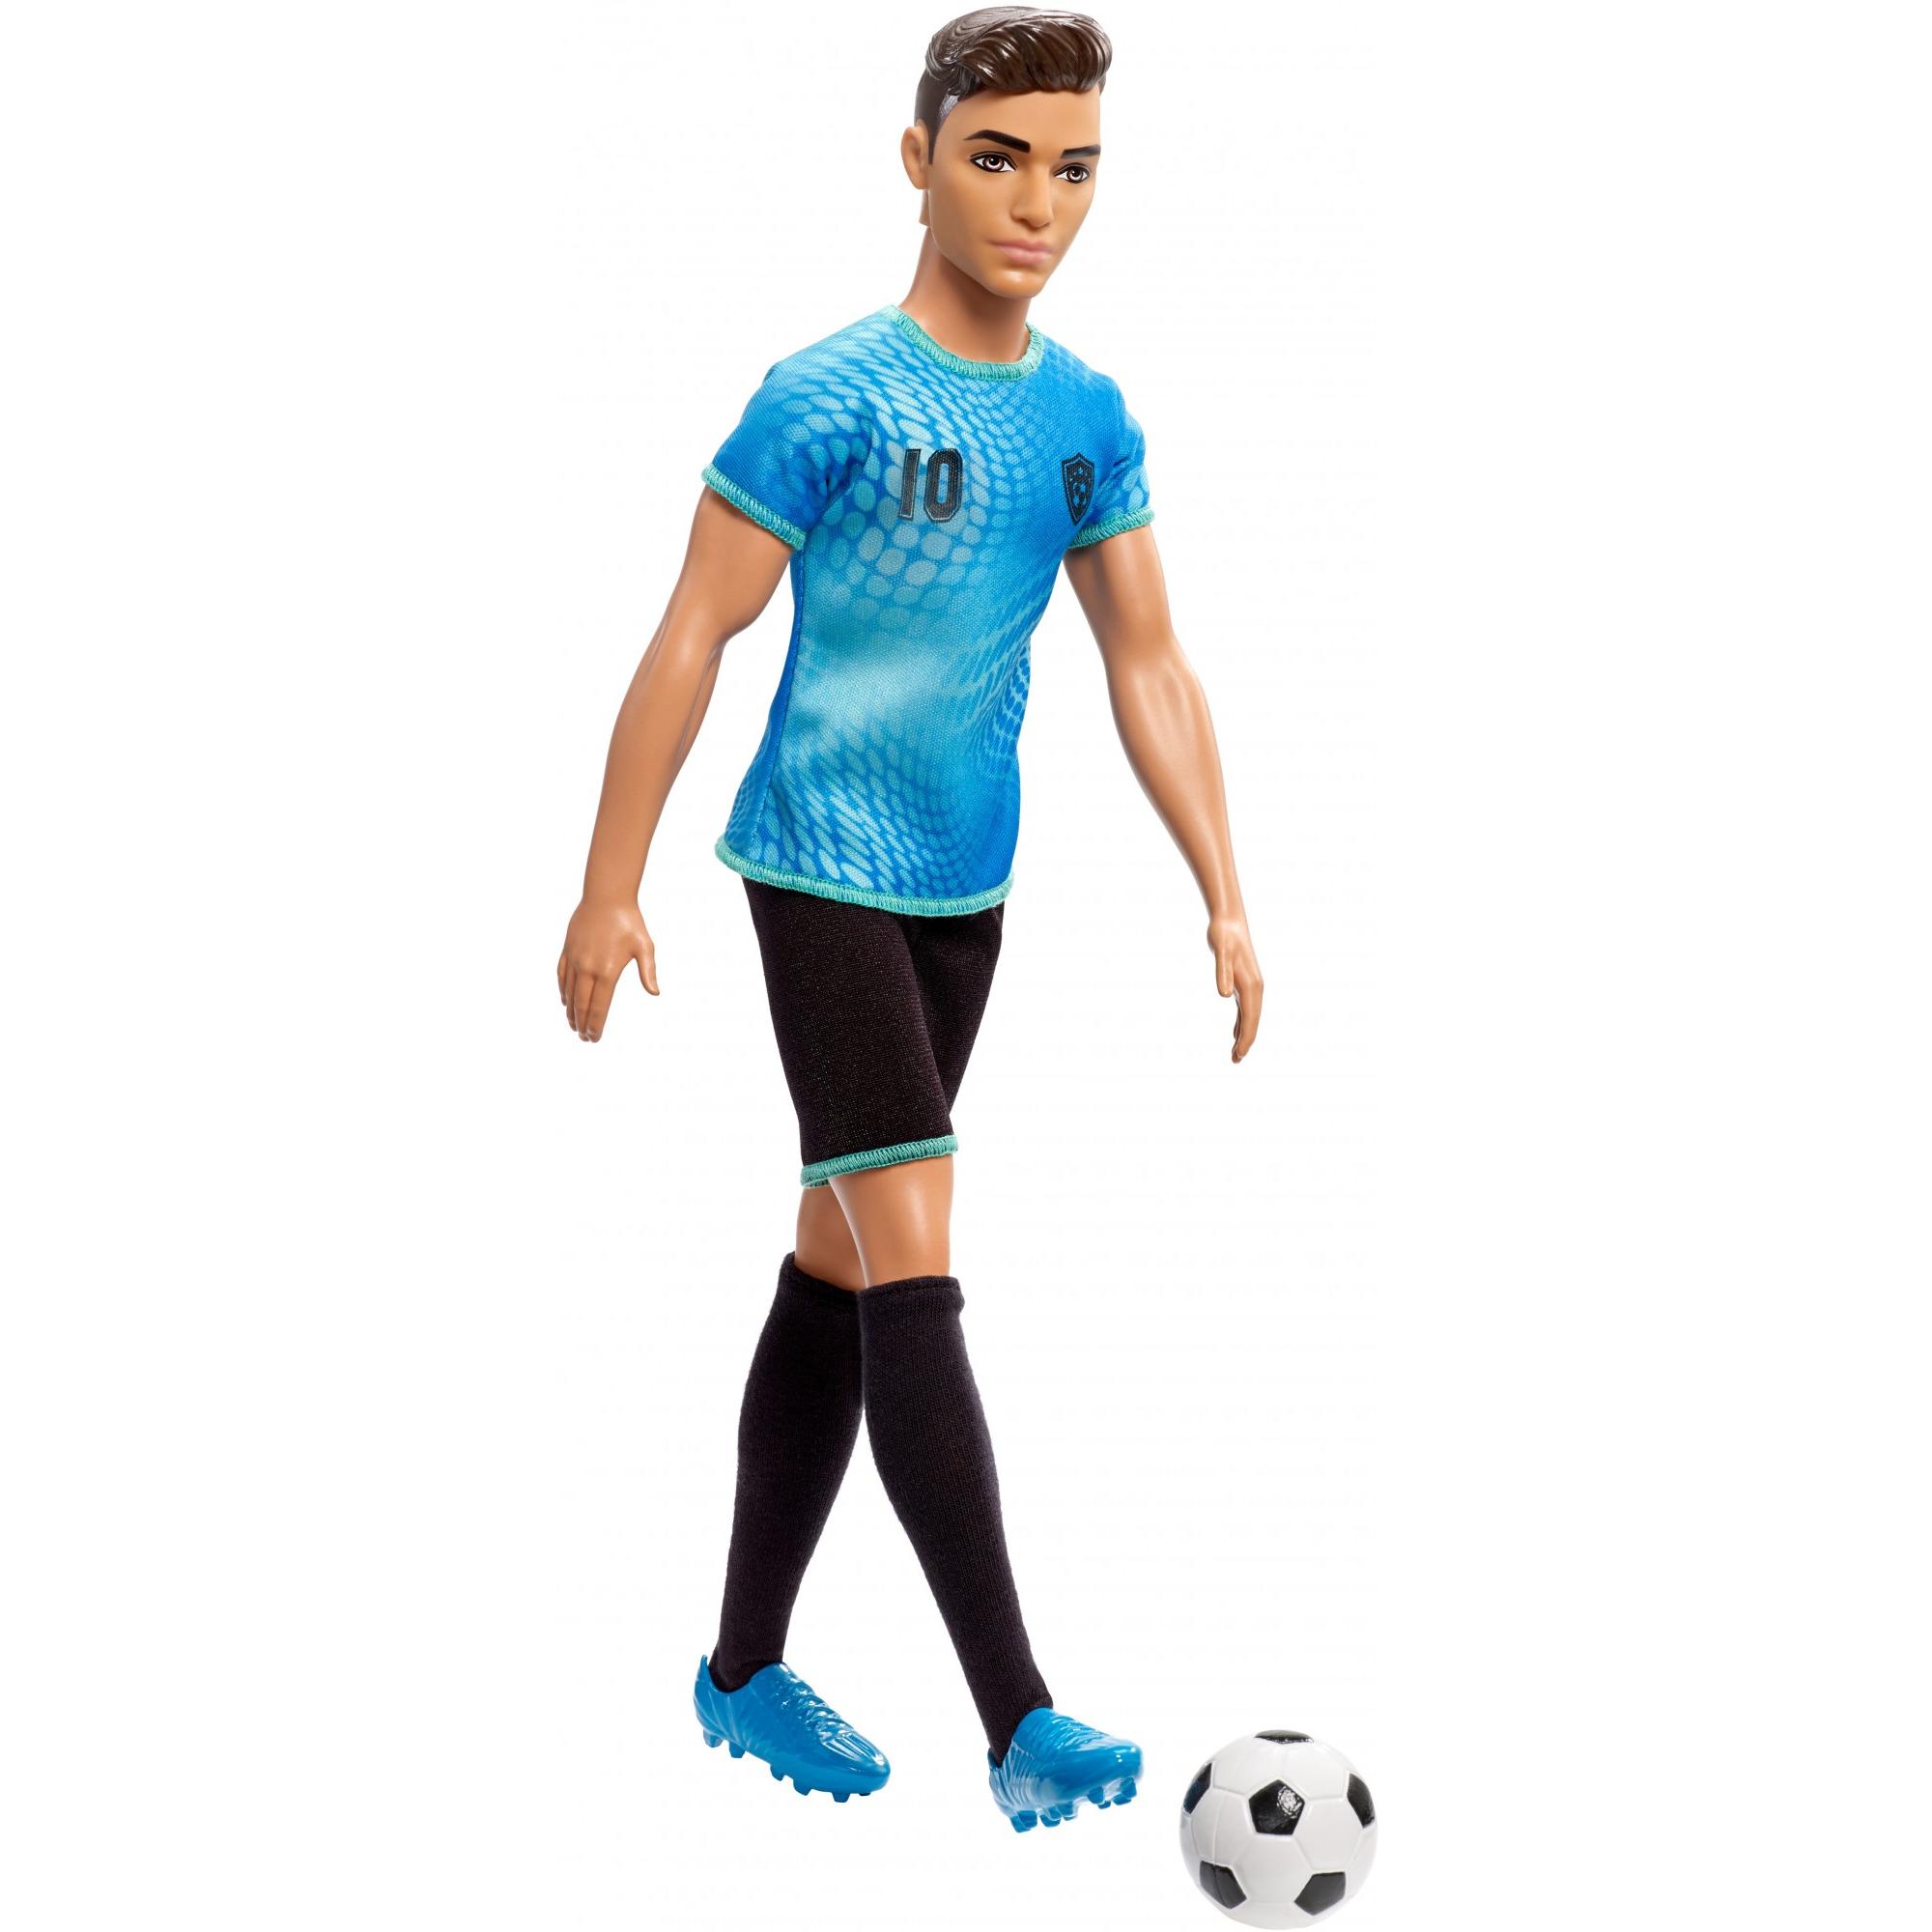 Barbie Ken Careers Soccer Player Doll with Soccer Ball - image 3 of 6